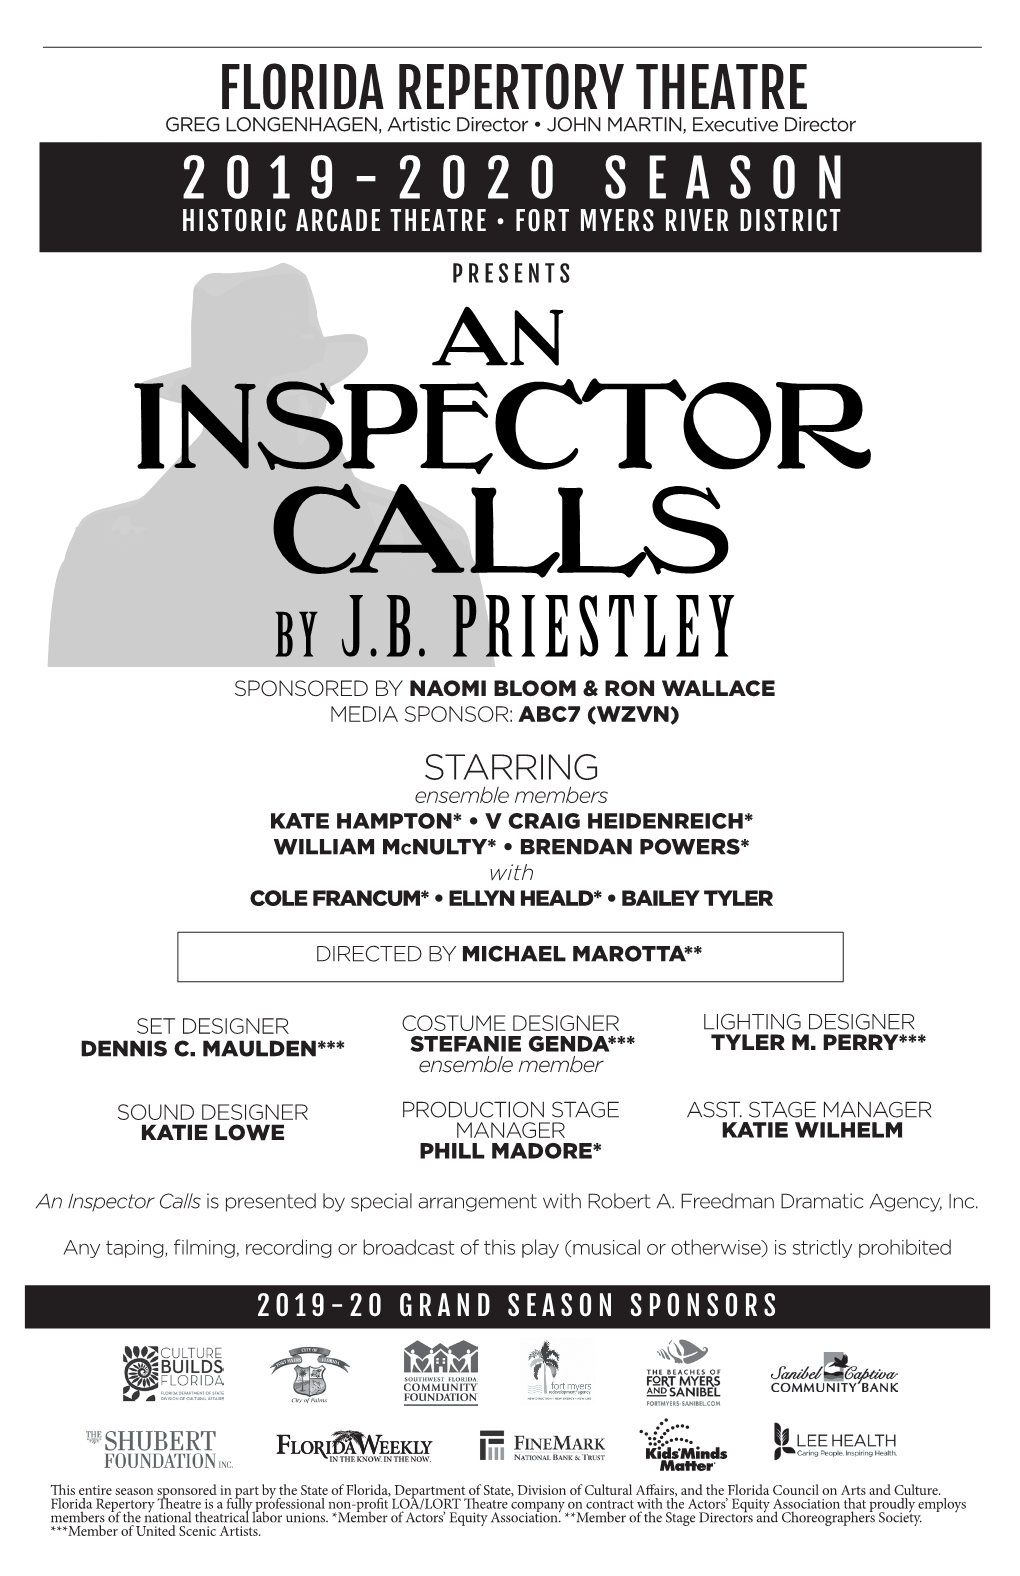 An Inspector Calls Is Presented by Special Arrangement with Robert A